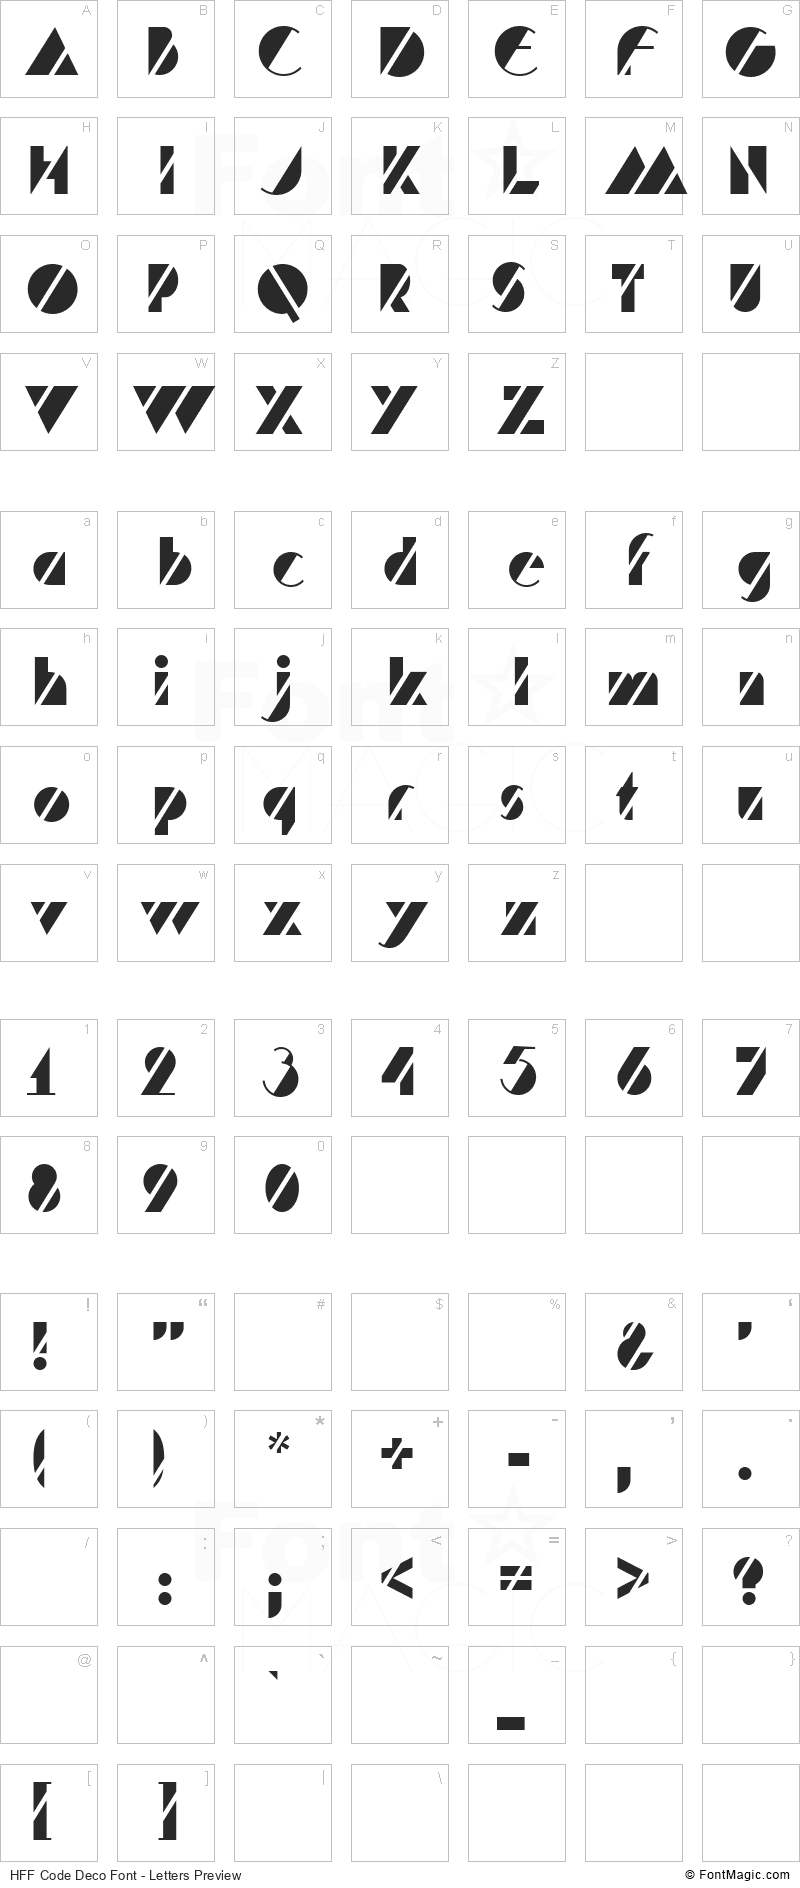 HFF Code Deco Font - All Latters Preview Chart